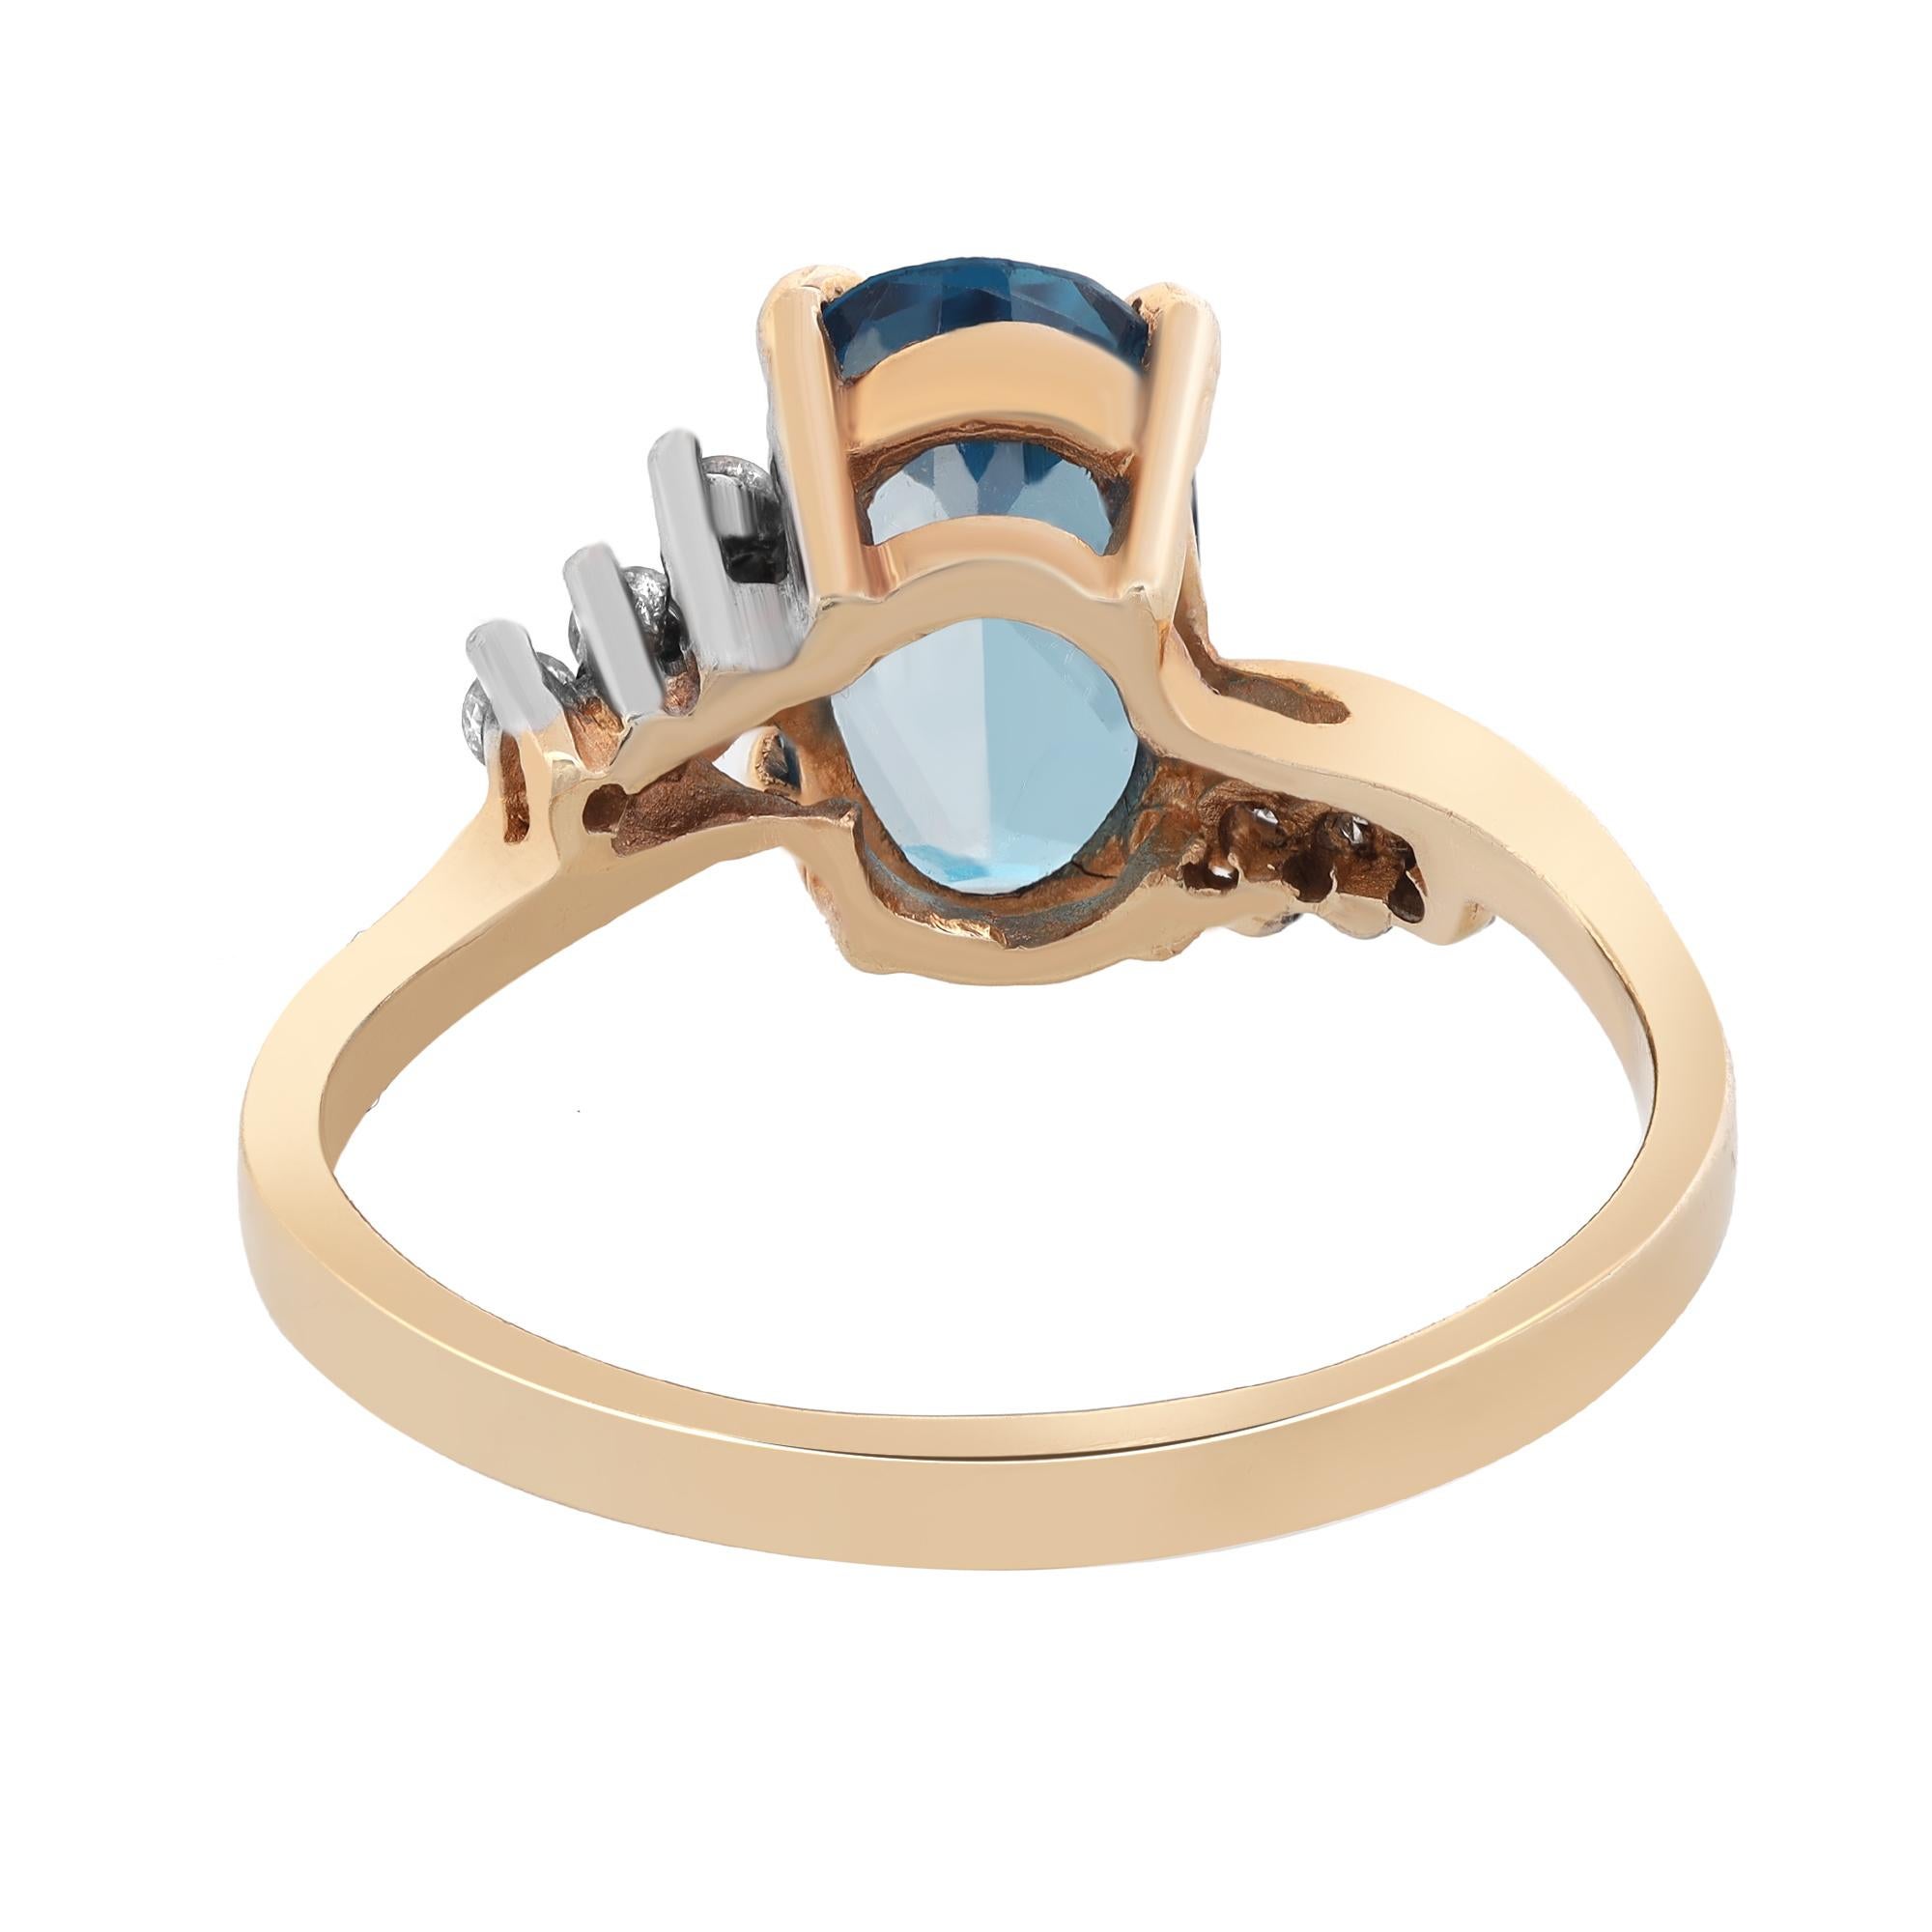 This gorgeous ladies ring is crafted in 14k yellow gold. Features prong set oval cut london blue topaz weighing 1.73 carats with 6 sparkling round cut diamonds. Ring size 7.25. Total weight: 3.00 grams. Comes with a presentable gift box.
